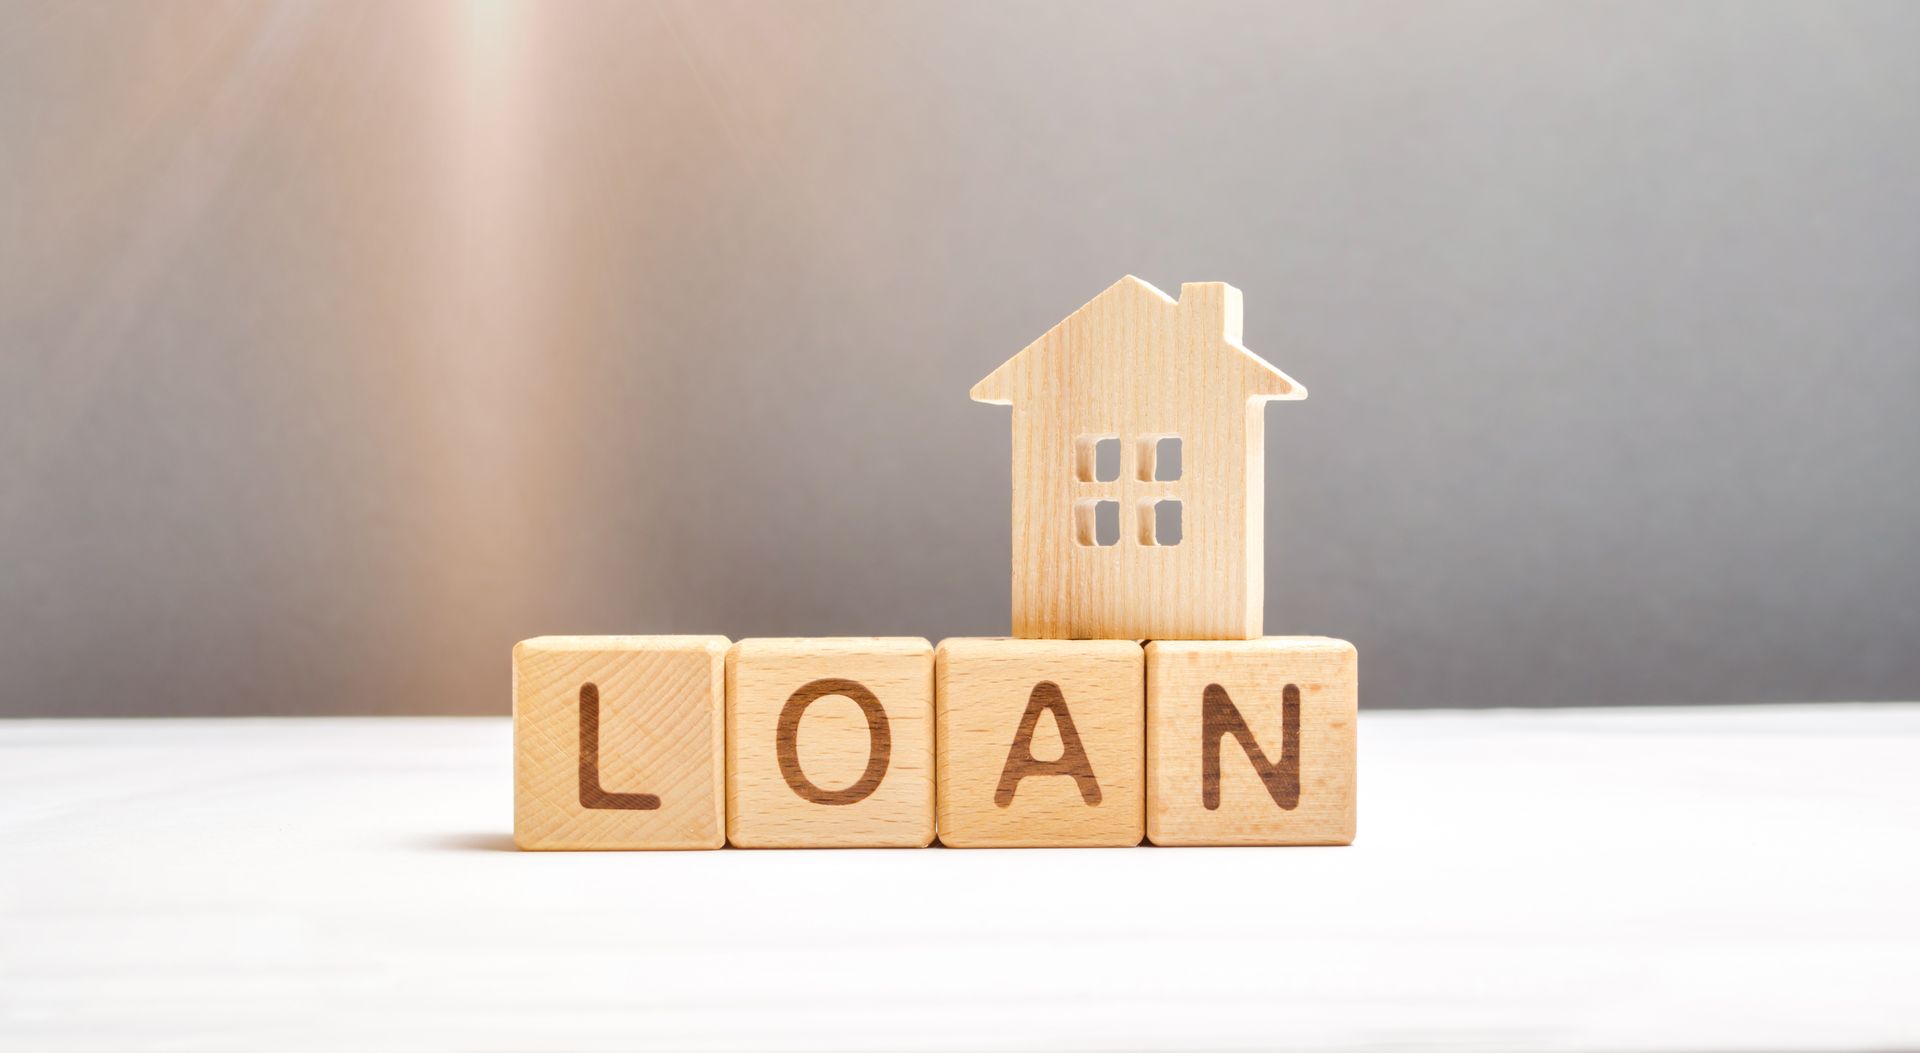 The word loan is written on wooden blocks with a house on top of them.